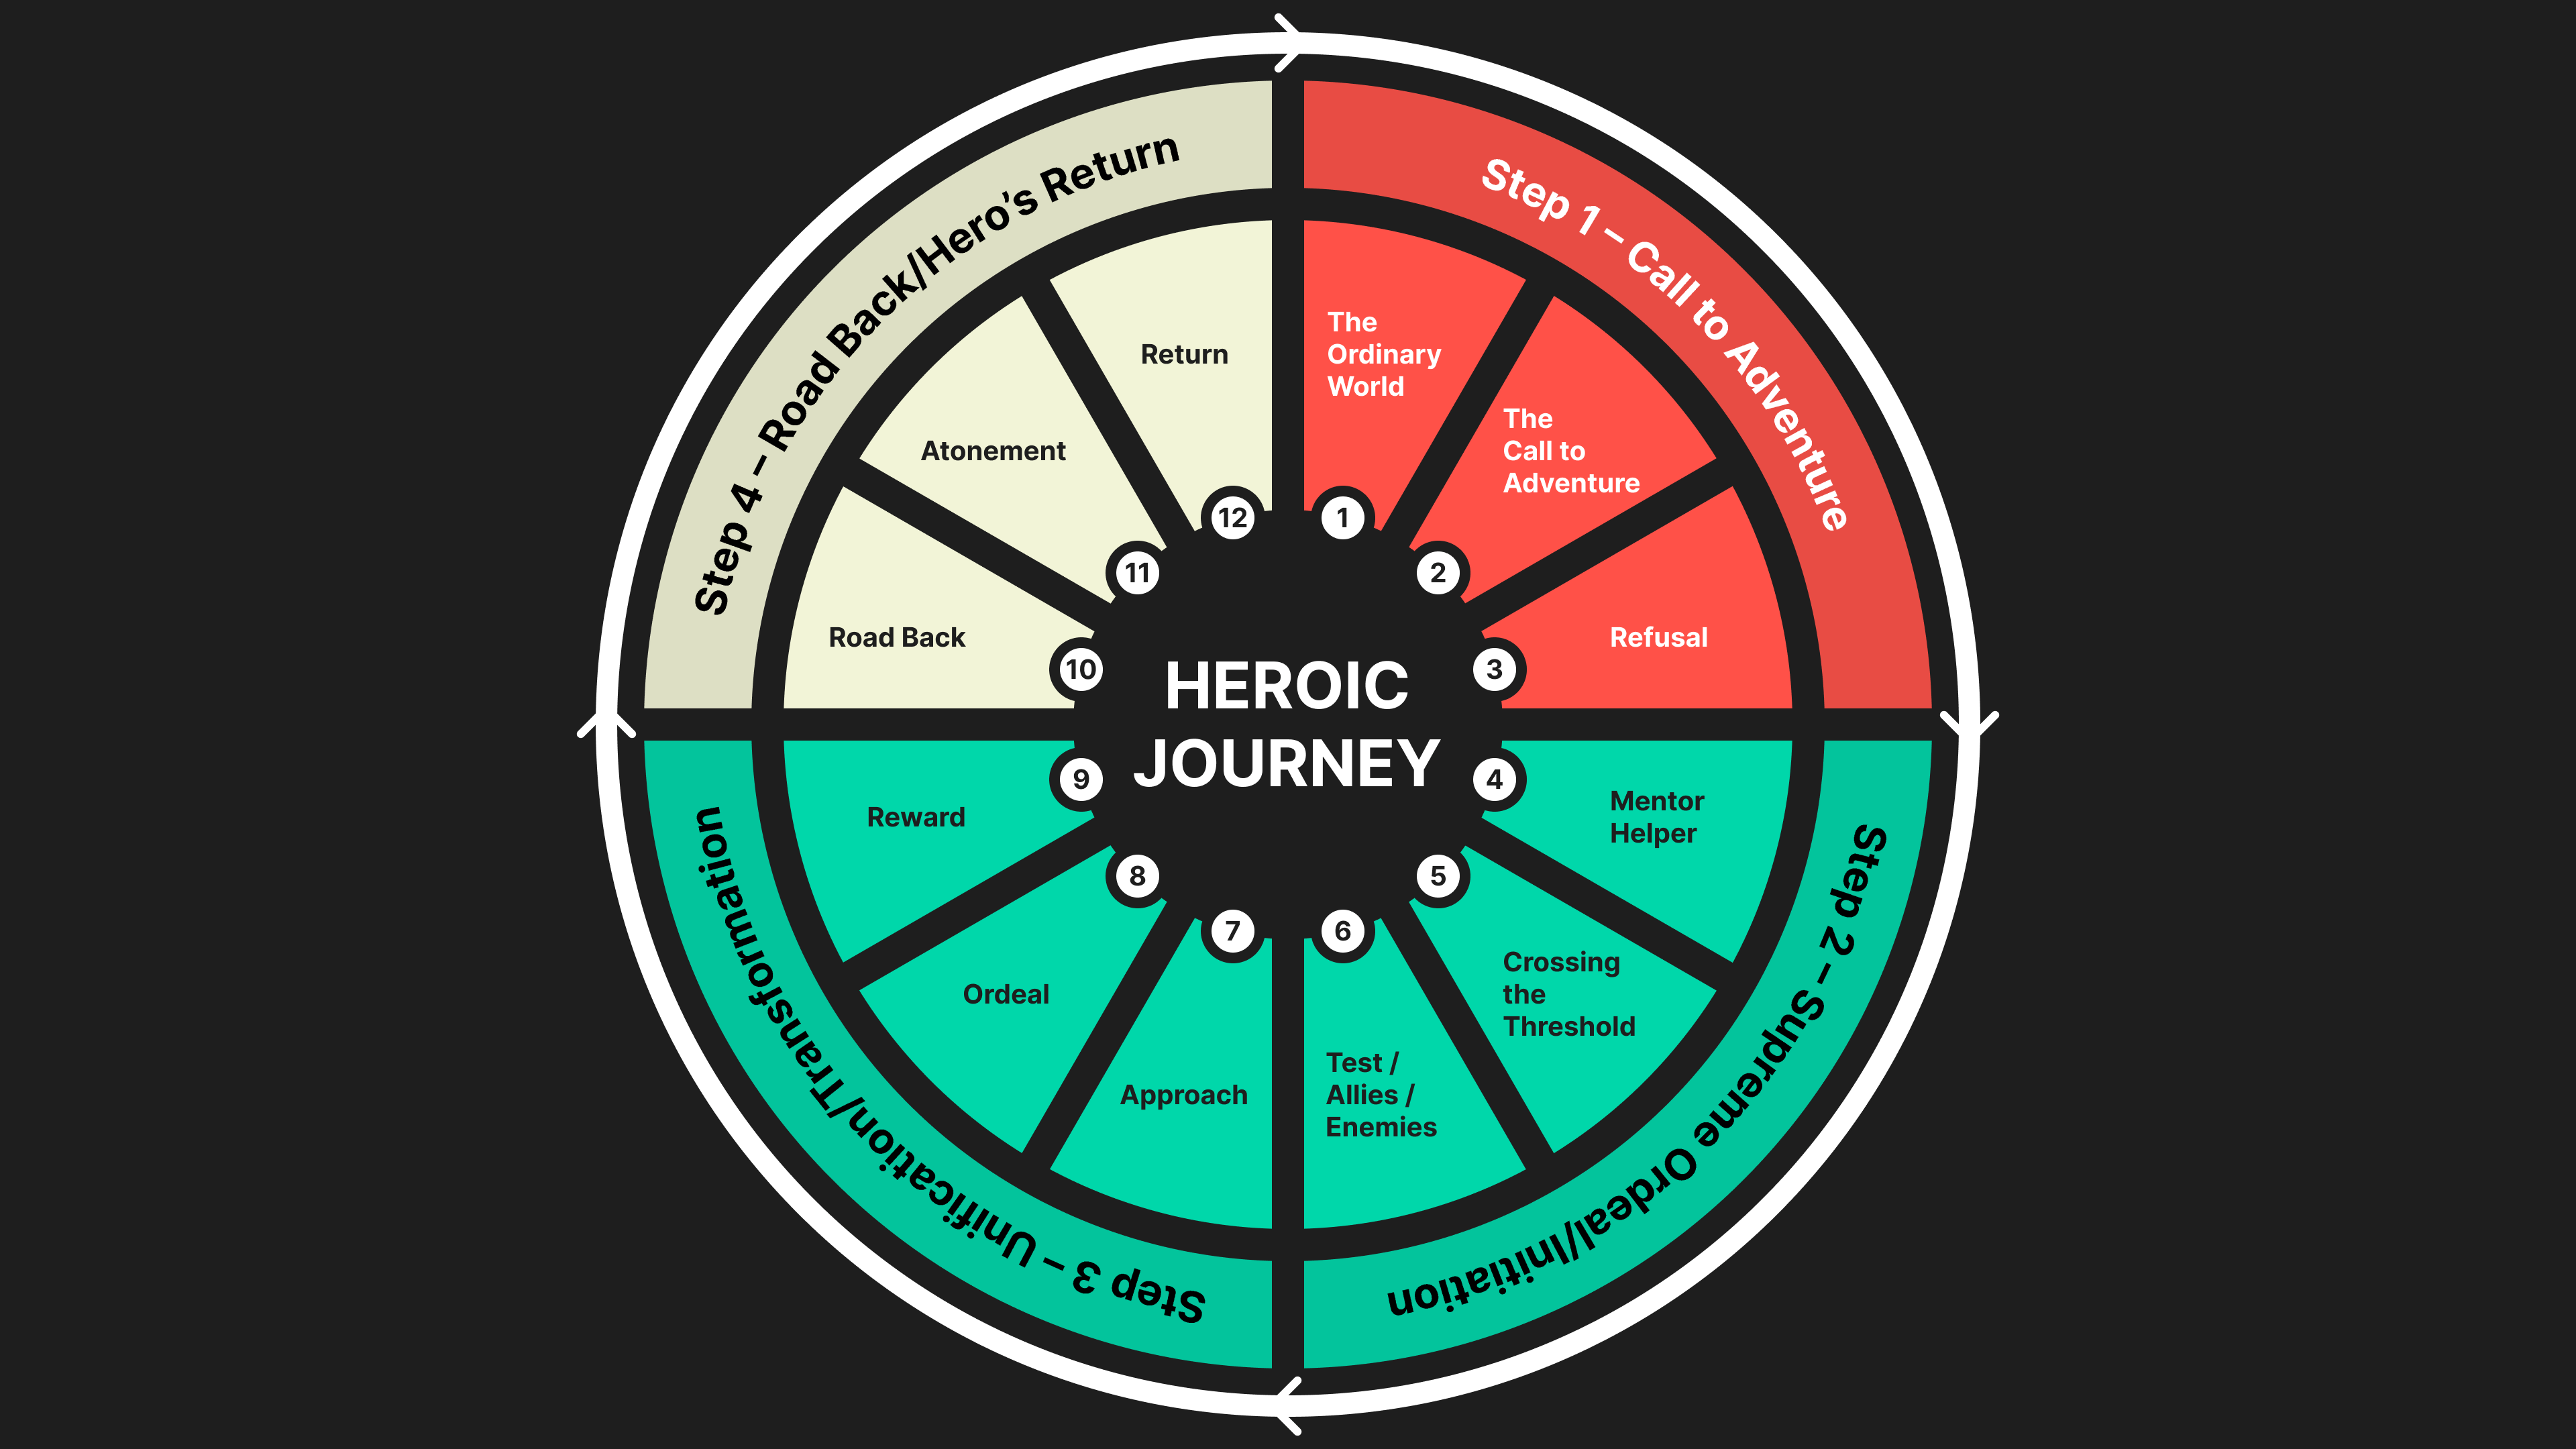 Joseph Campbell’s ‘Hero’s Journey’ or Monomyth, showing the protagonist’s journey from Step 1 - Call to Adventure, Step 2 - Initiation, Step 3 - Transformation, Step 4 - The Hero’s Return